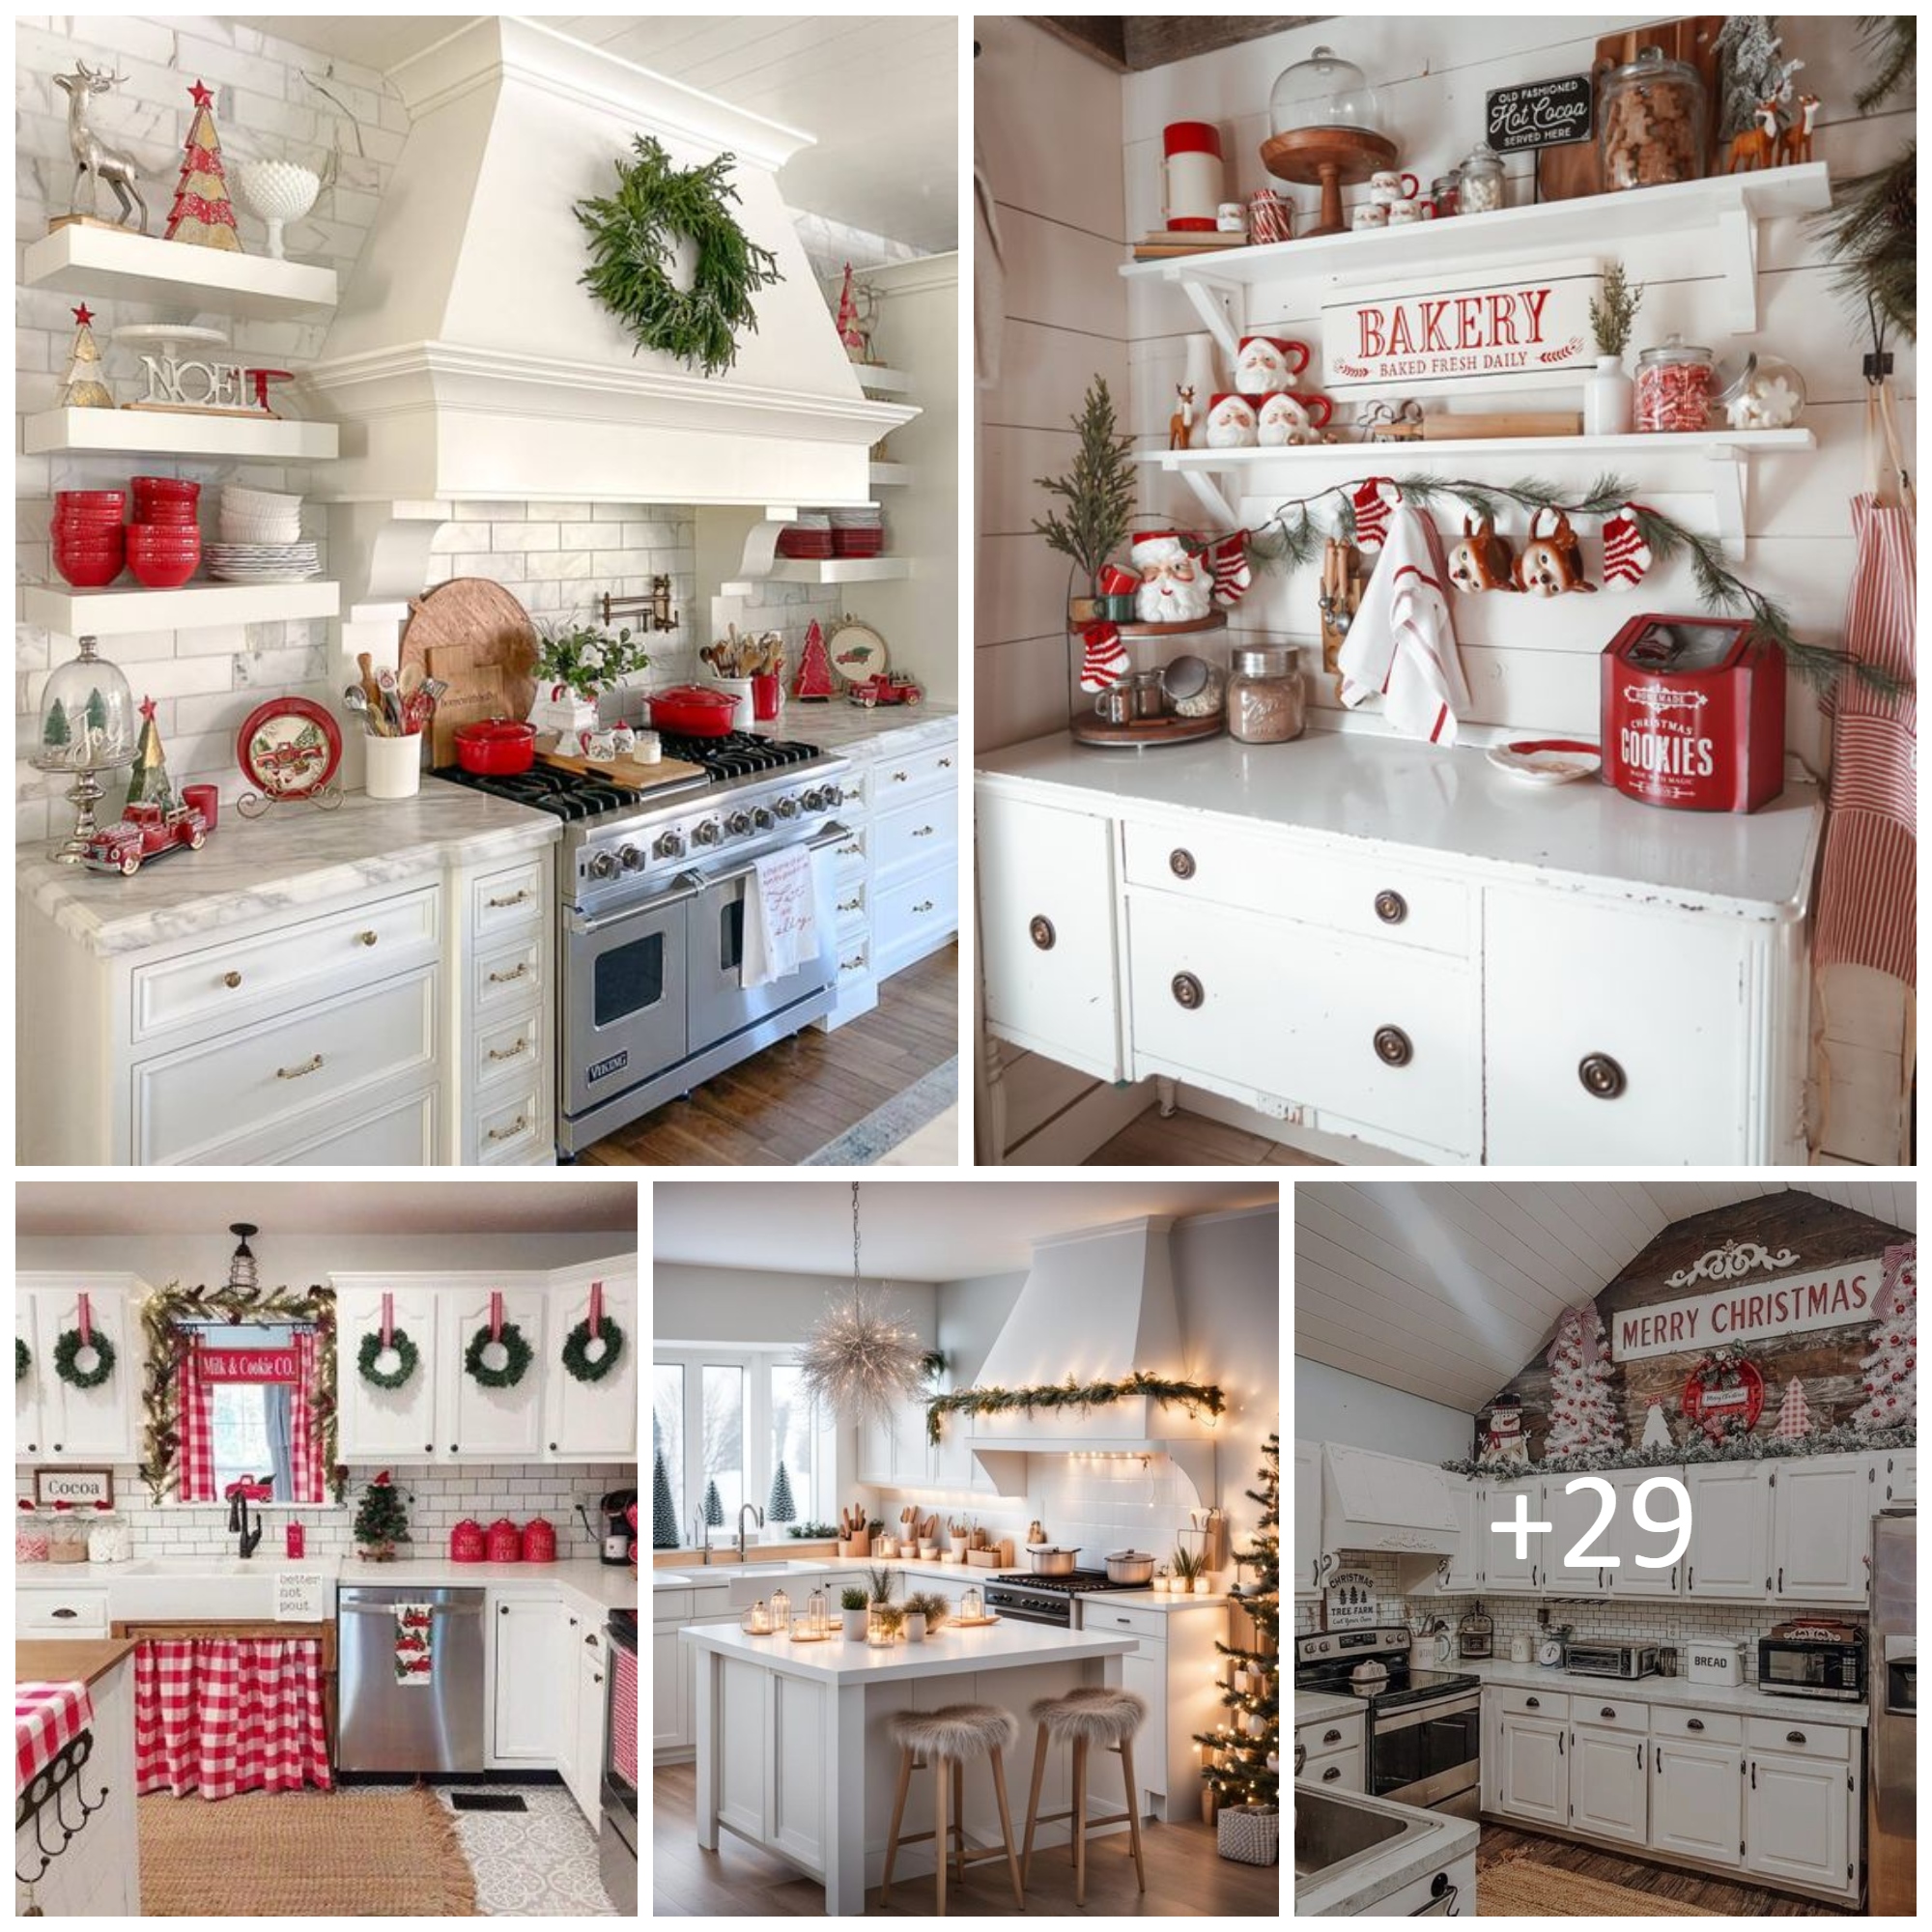 Christmas Kitchen Decorating Ideas for Cookin’ up Cheer